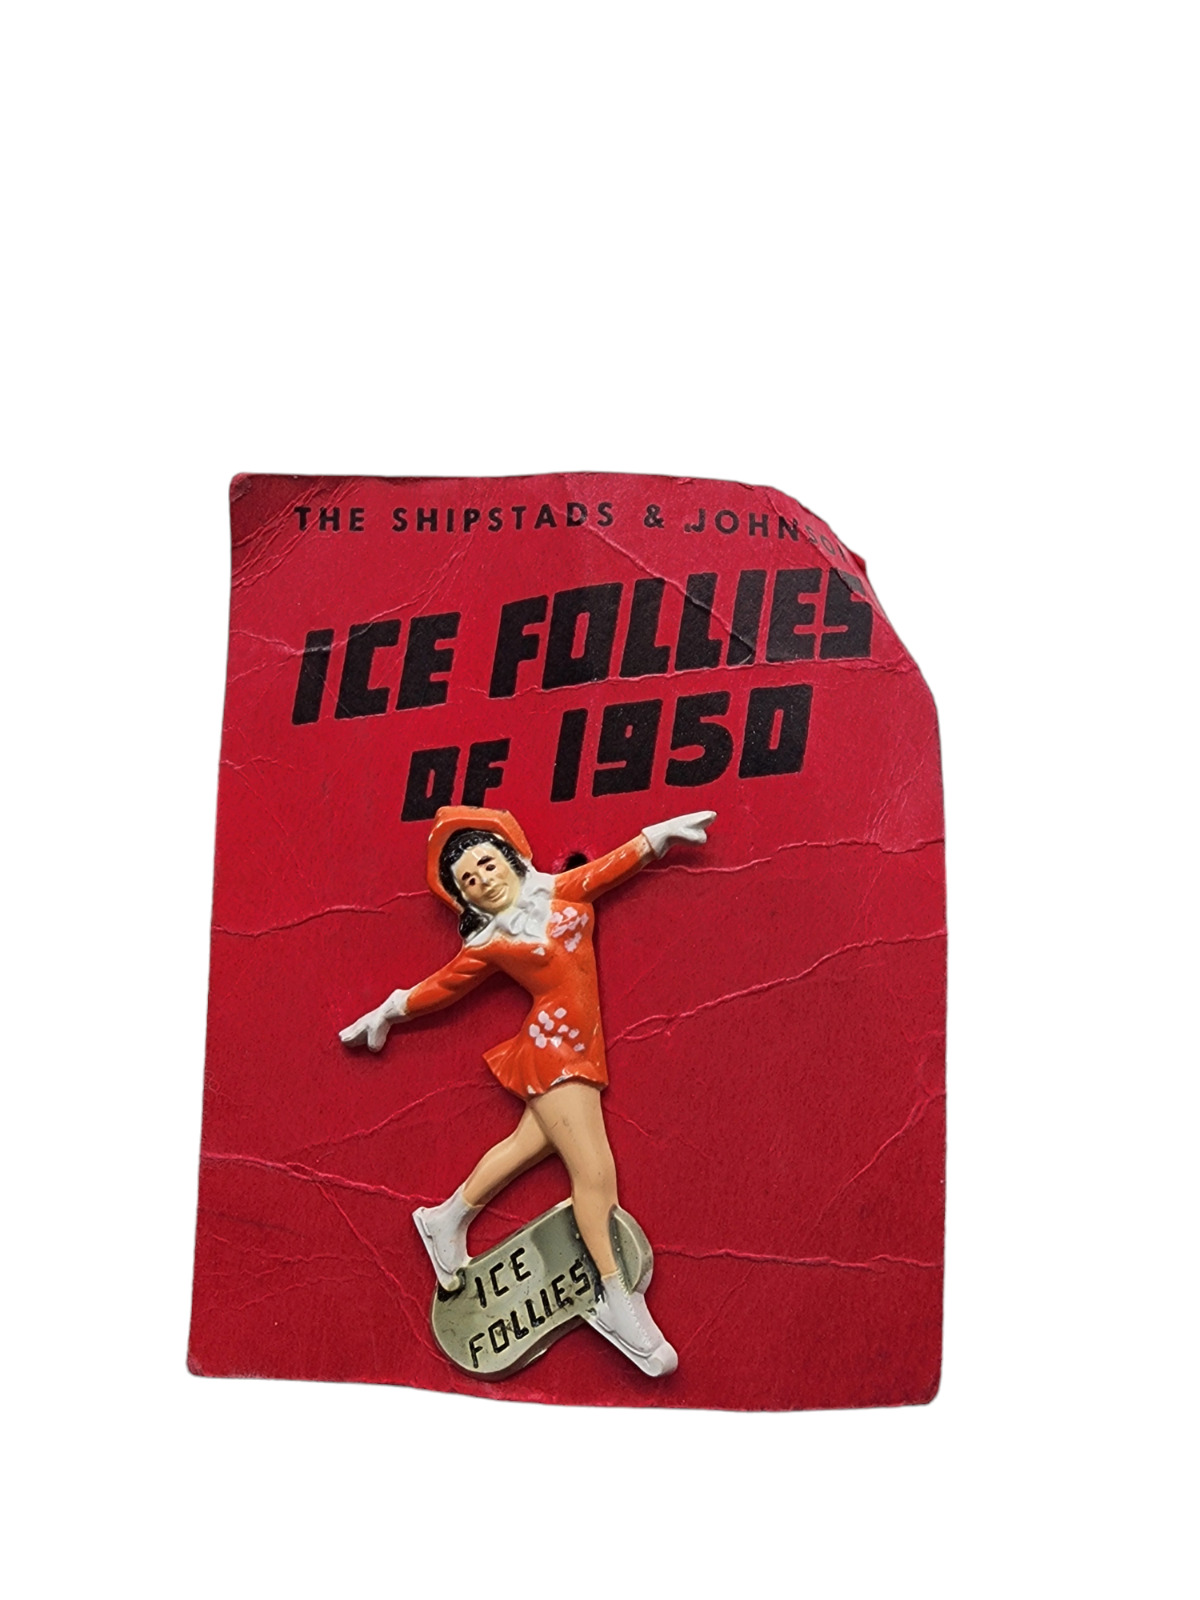 ICE FOLLIES OFFICIAL 1950 1951 The Shipstads & Johnson Pin